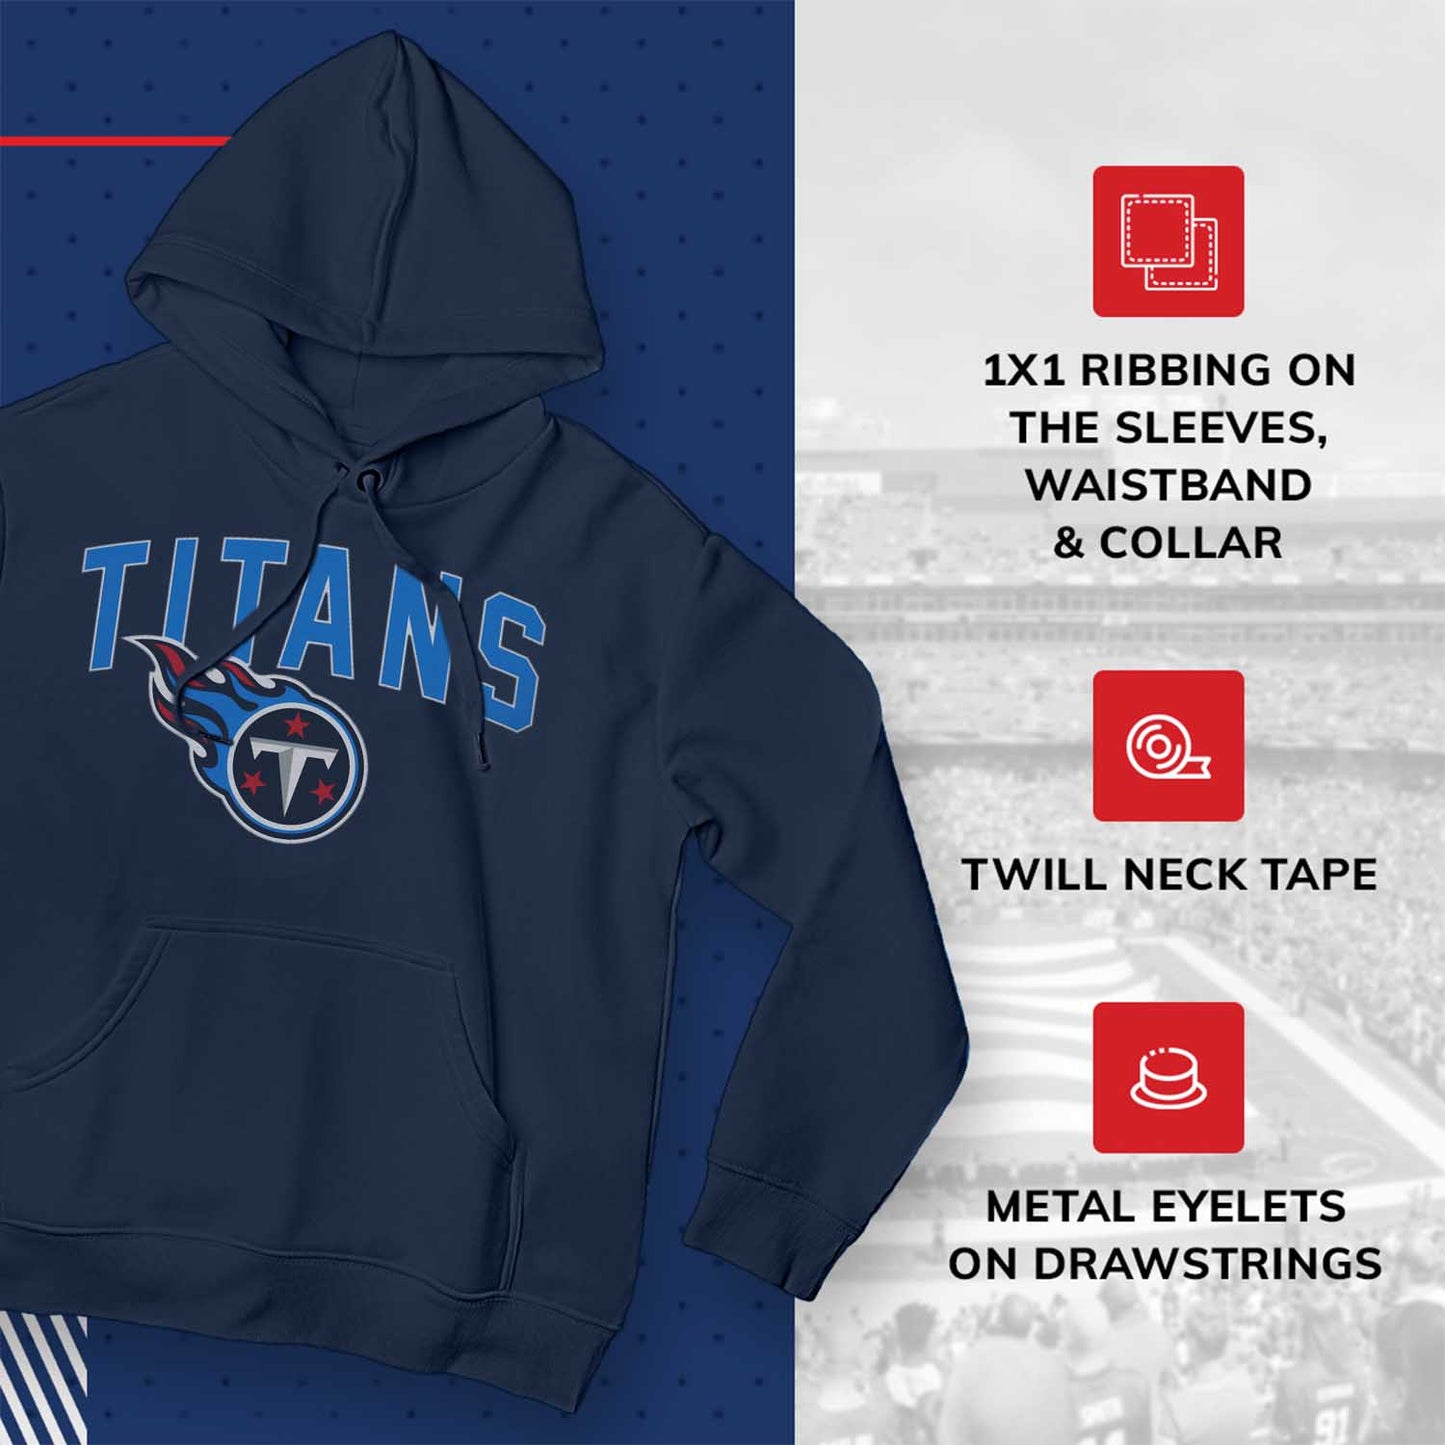 Tennessee Titans NFL Home Team Hoodie - Navy